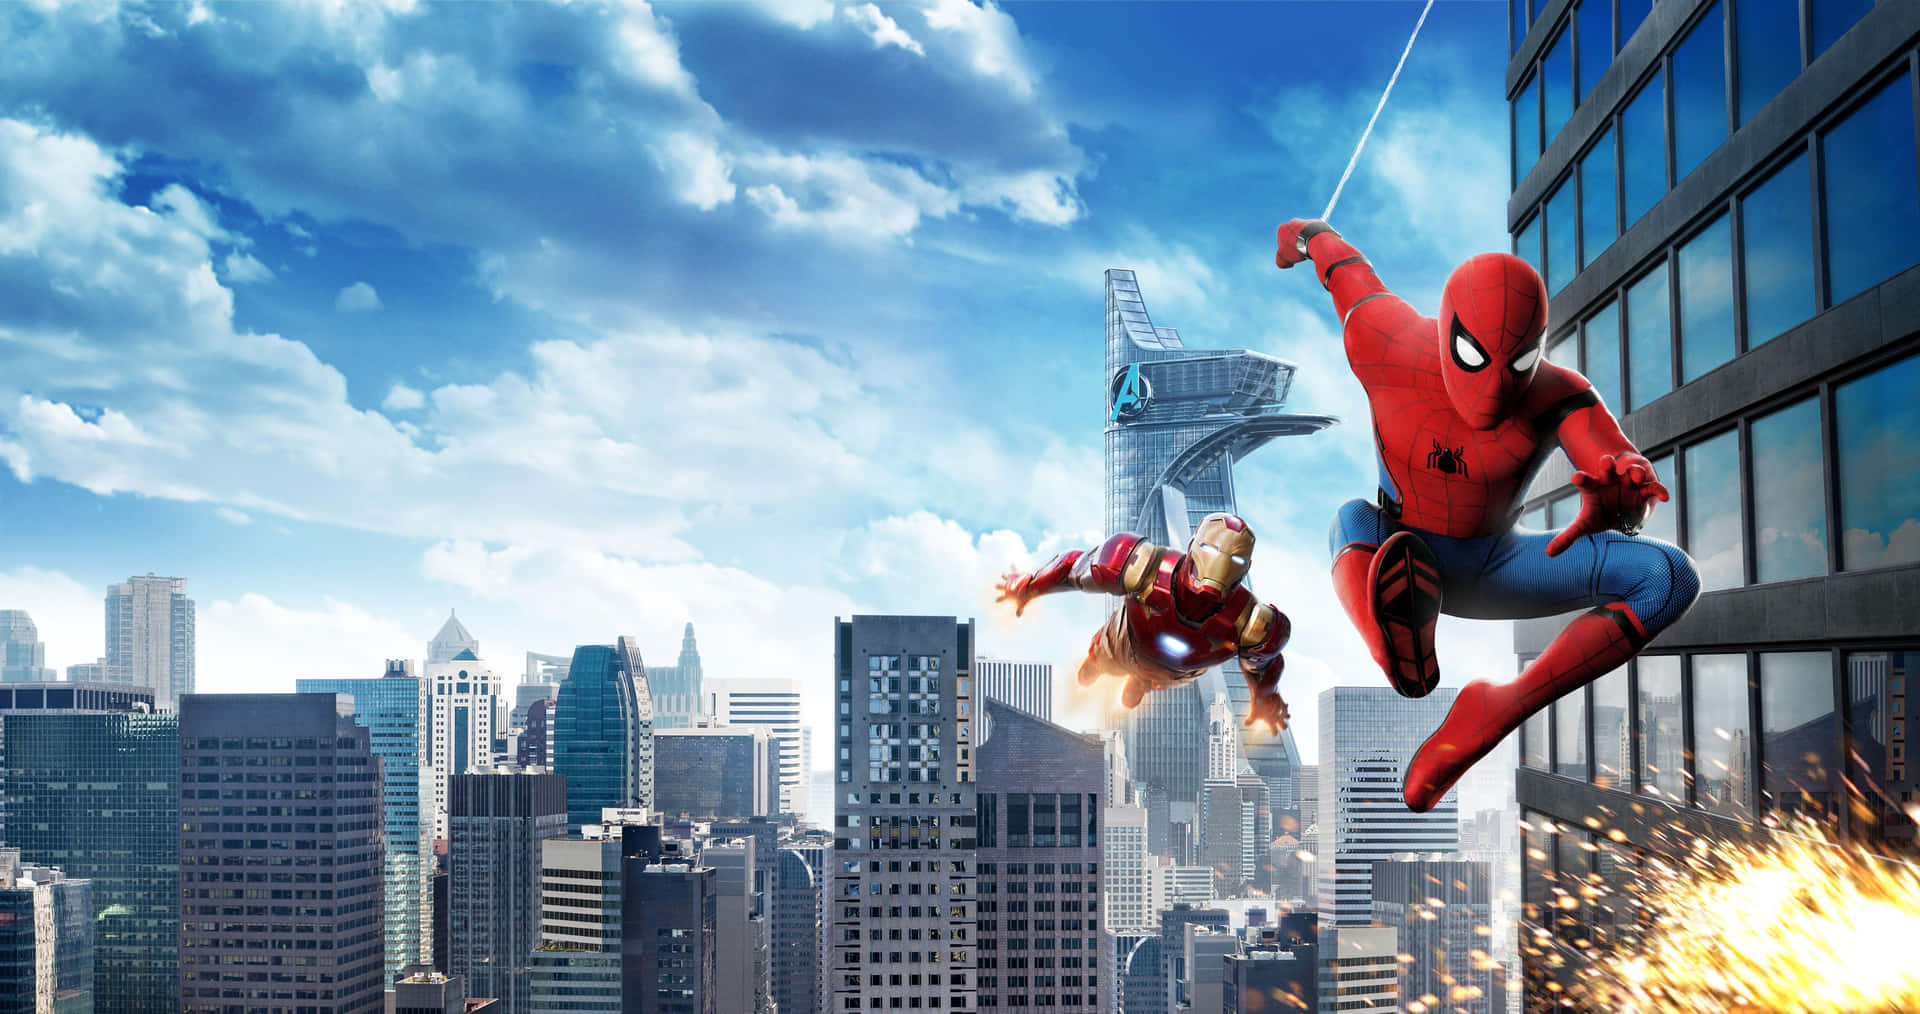 "Look out! The web-slinger and the man of iron are ready to take on any foe!" Wallpaper